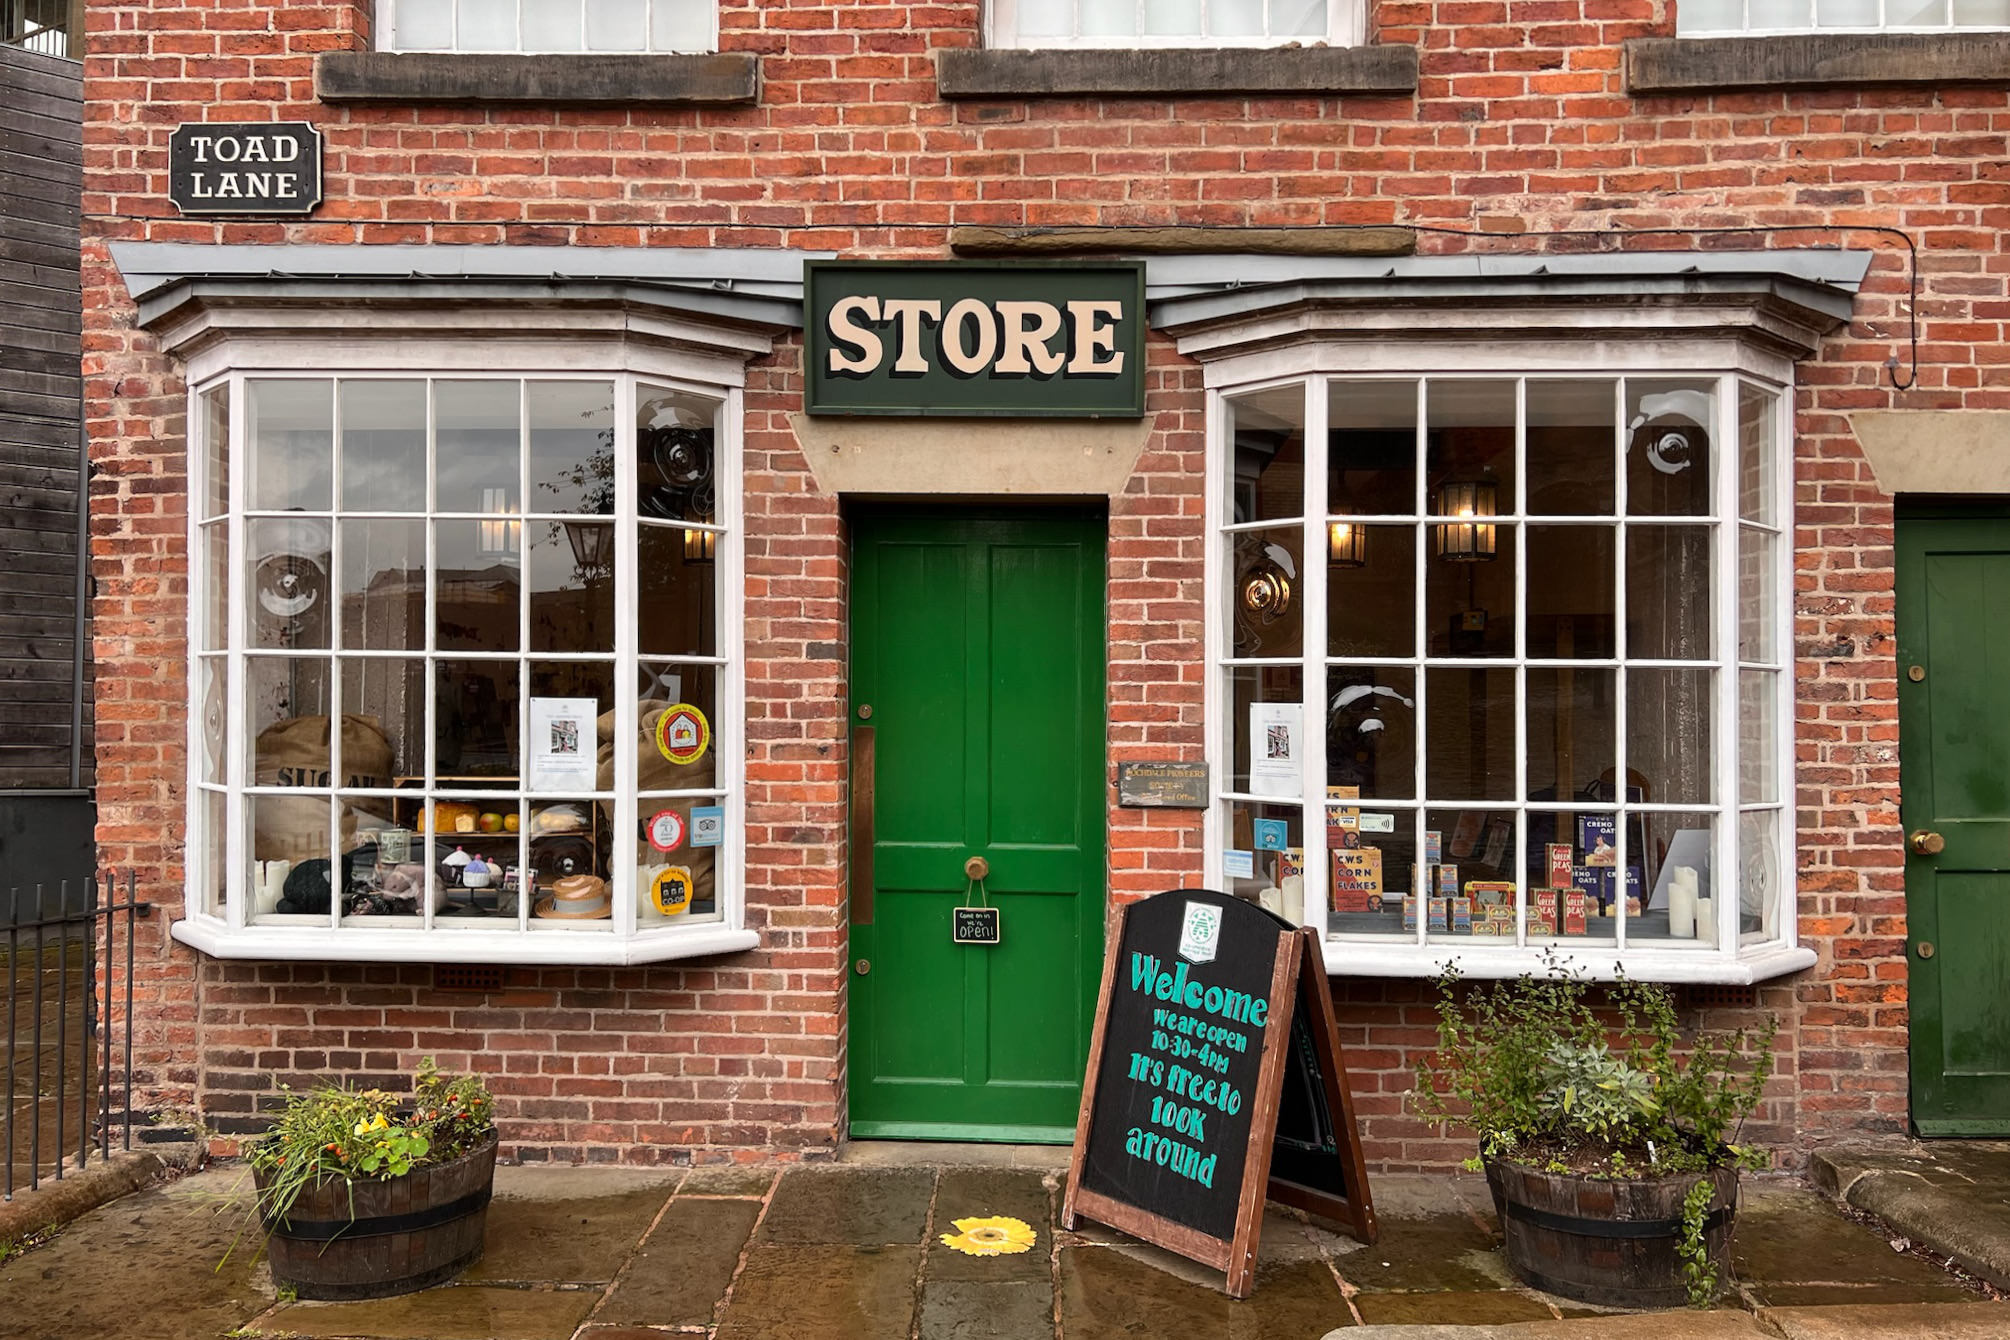 A quaint English storefront with a sign that says “Store” and two large windows, a green door, in a red brick building